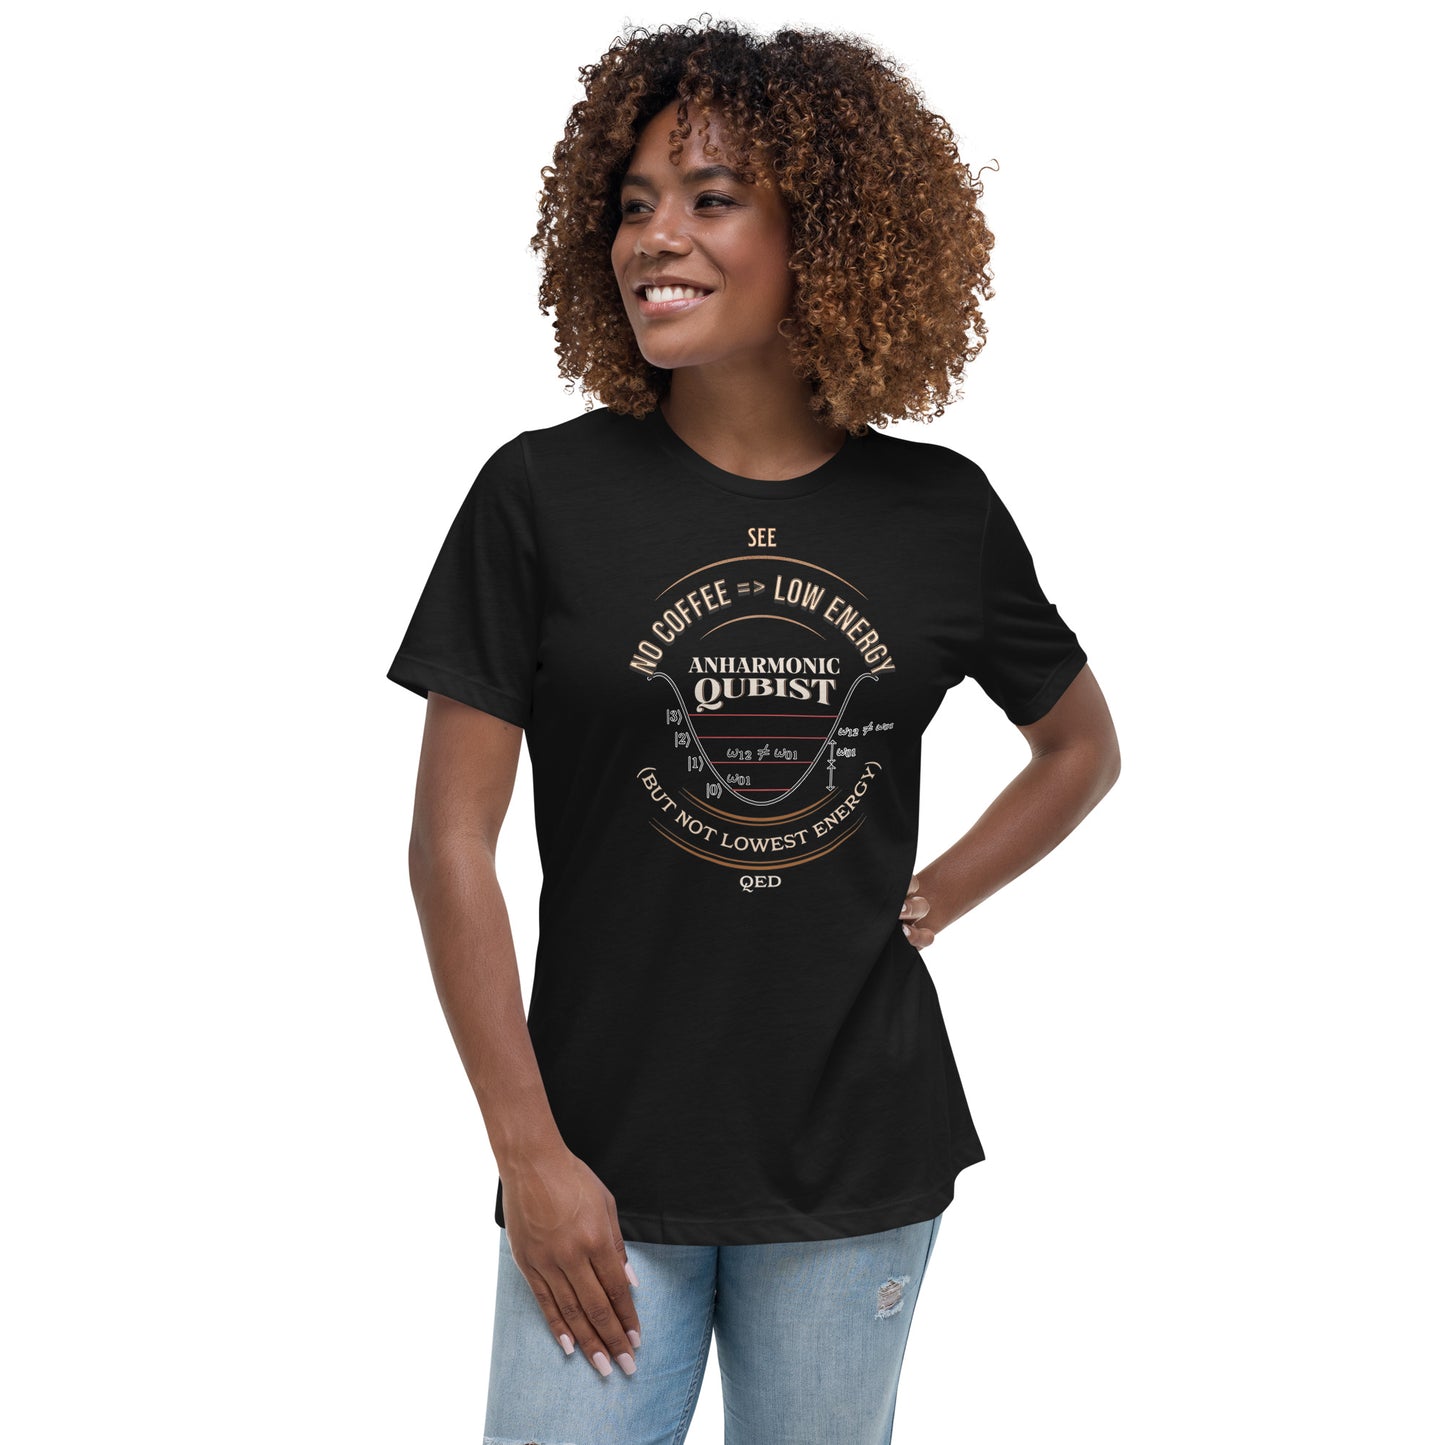 Women's Relaxed T-Shirt - Anharmonic Oscillations of a lightly caffeinated qubist, c QED